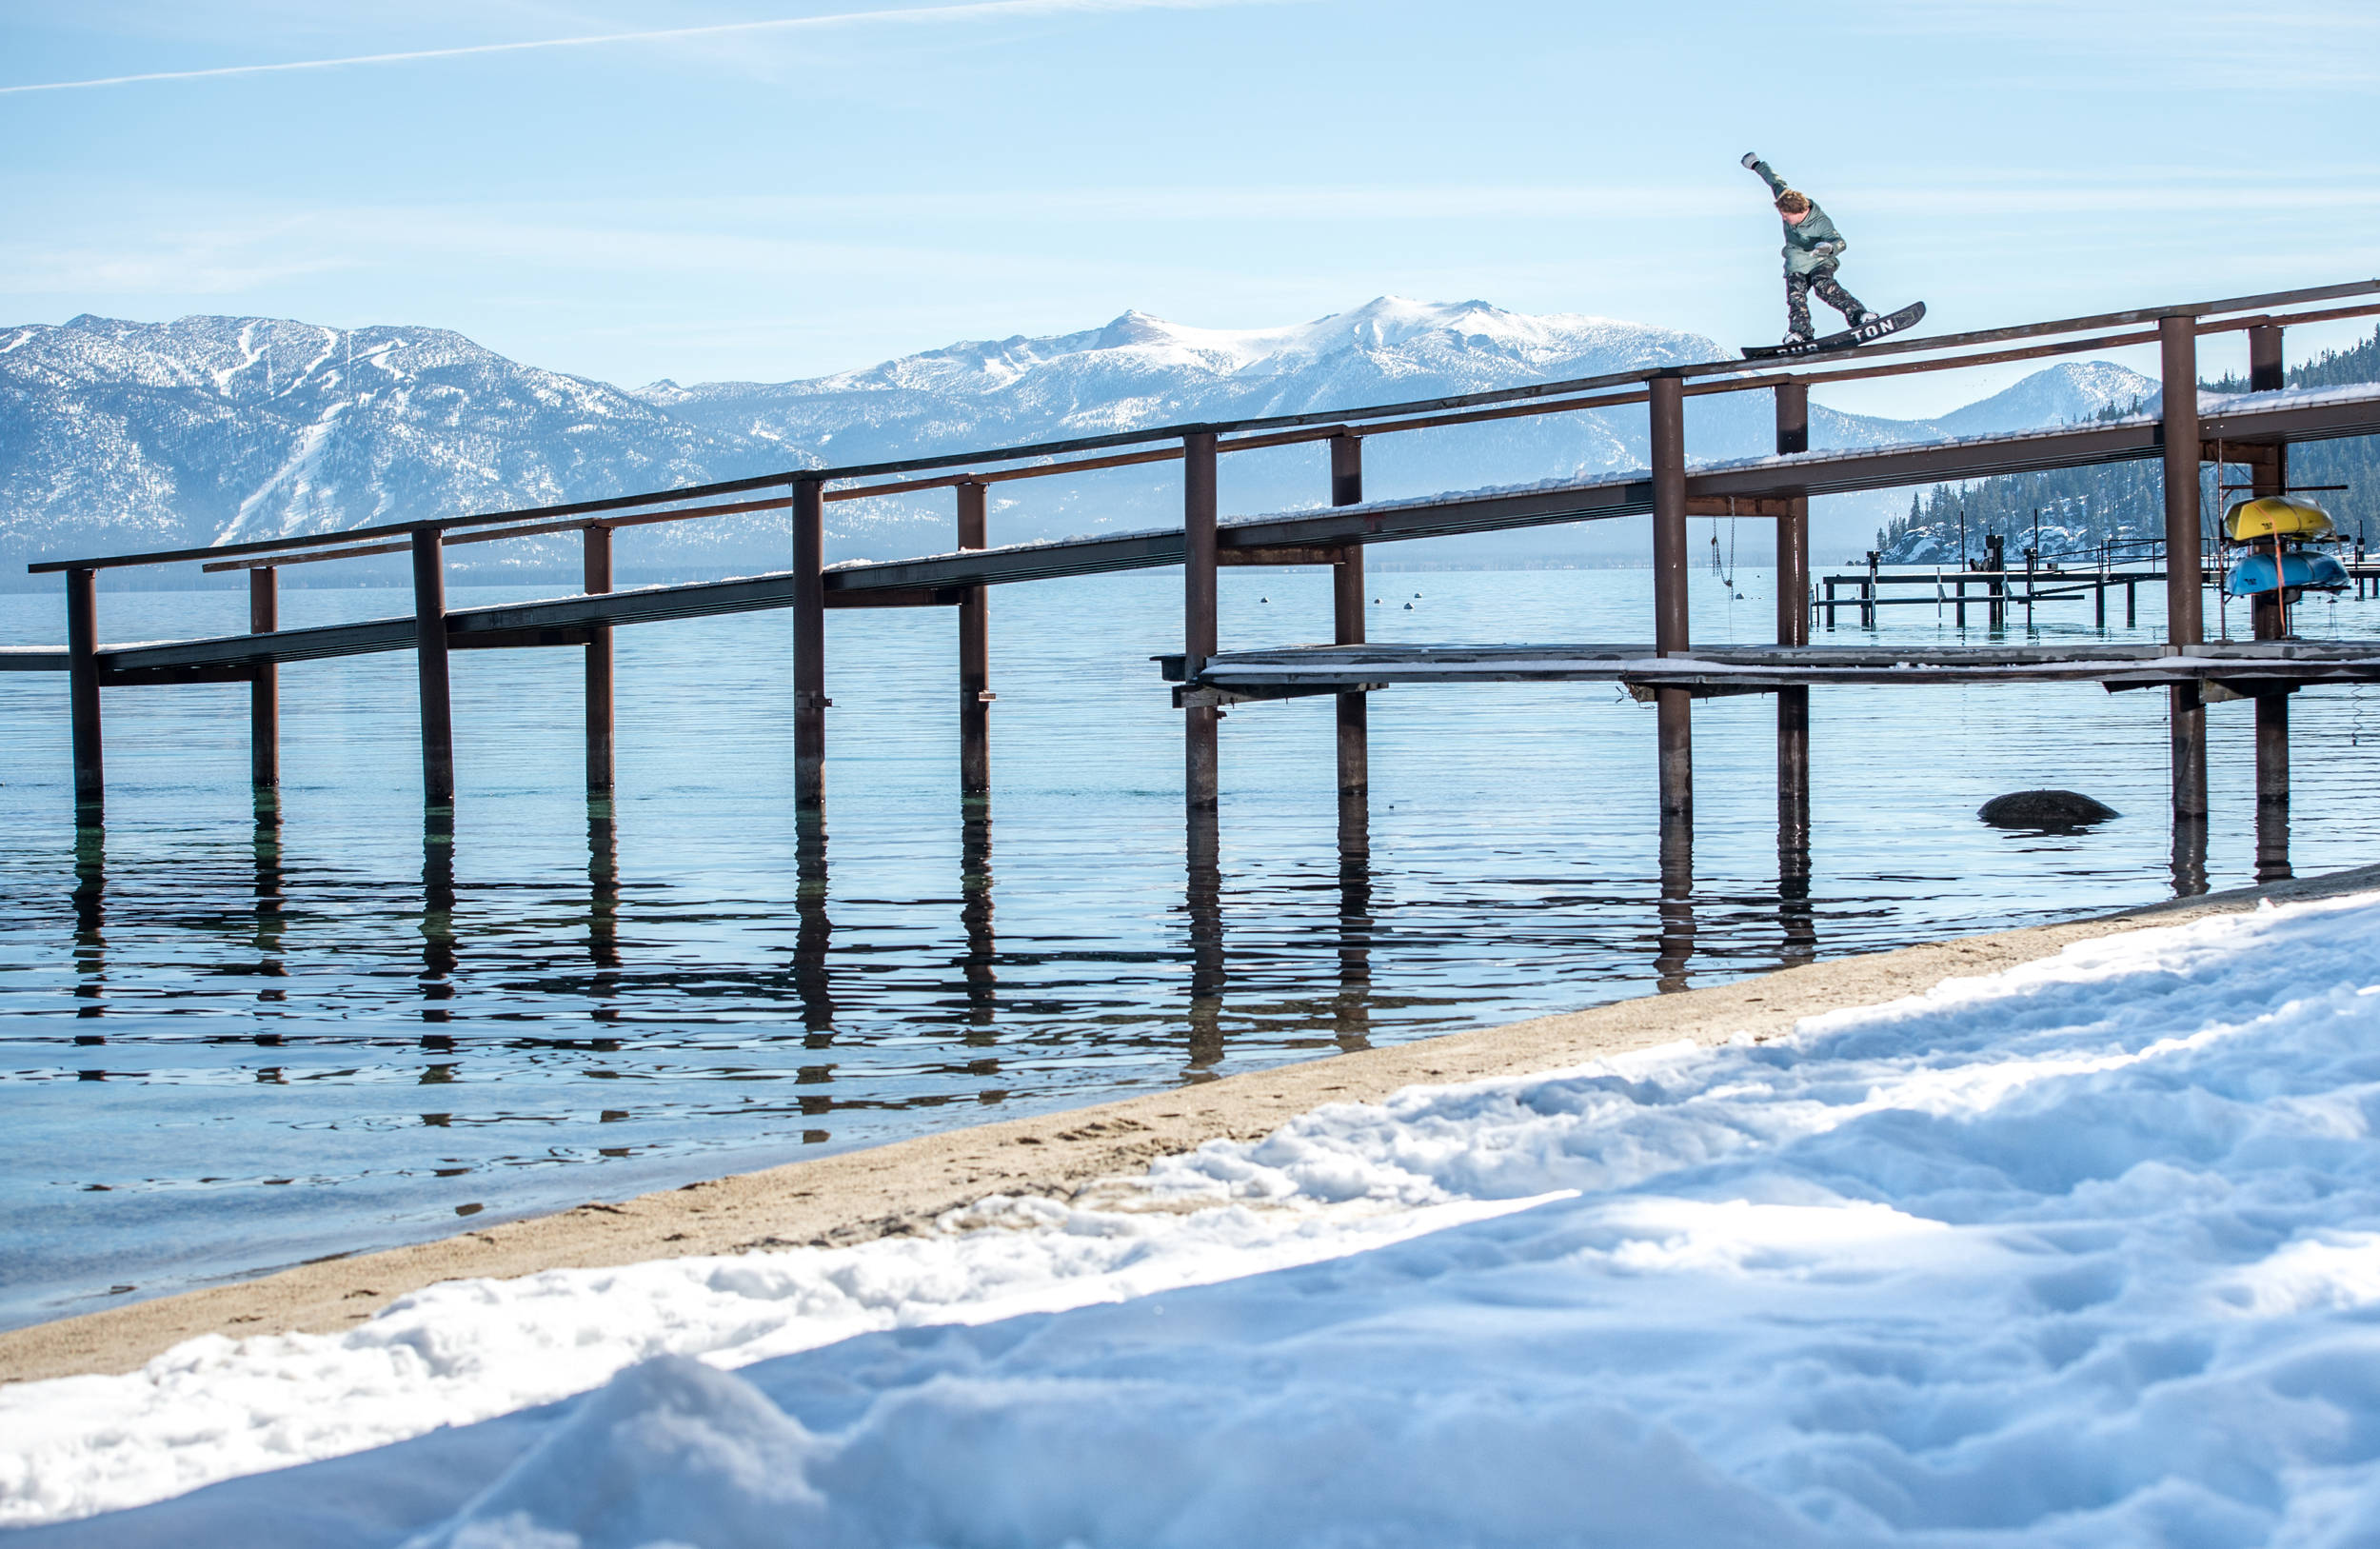 Nate Hause Tahoe snowboarding by Mike Dawsy